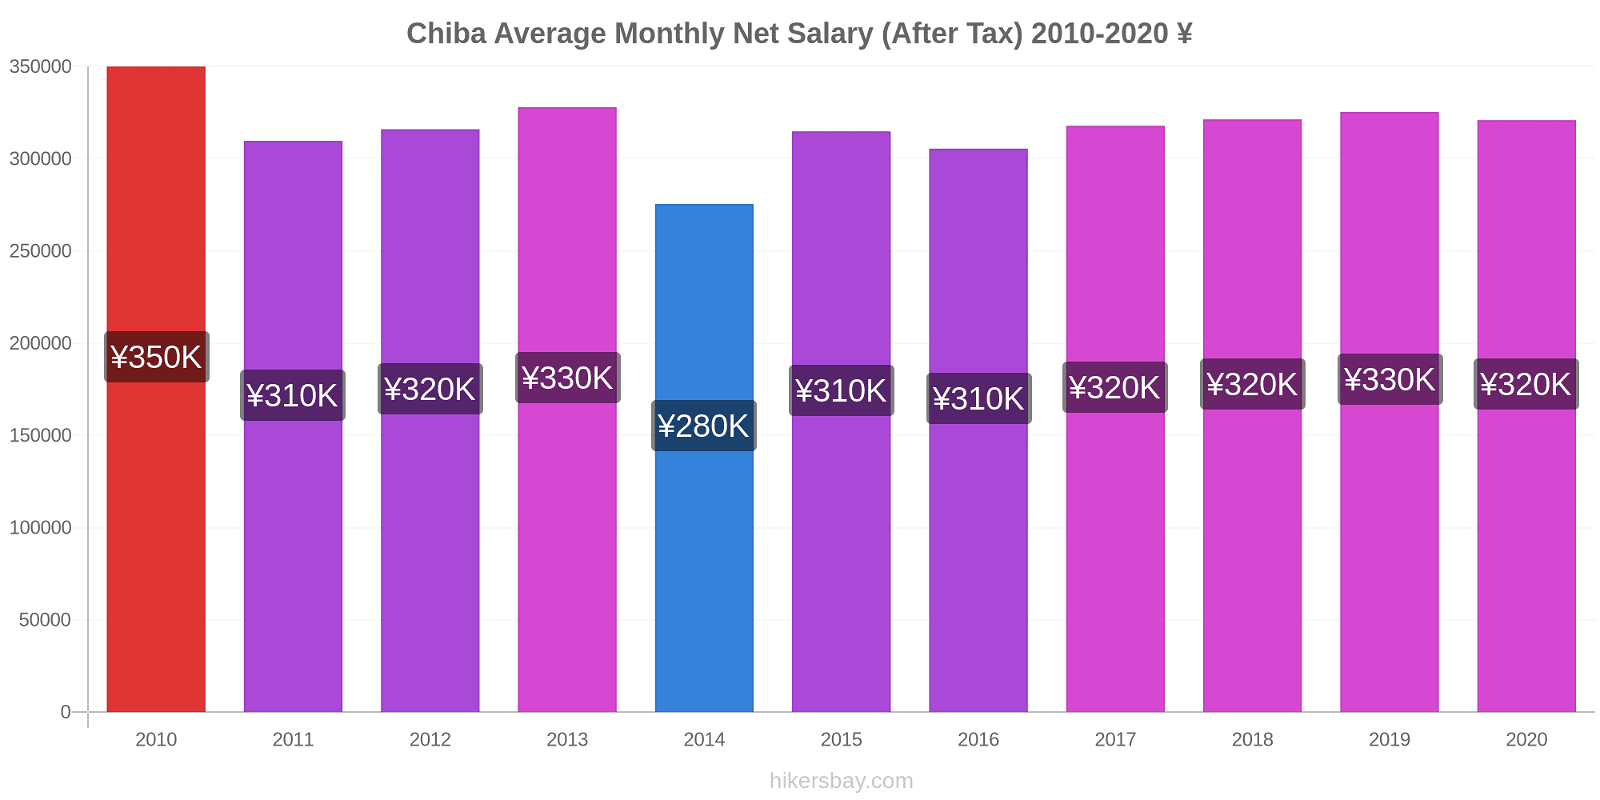 Chiba price changes Average Monthly Net Salary (After Tax) hikersbay.com